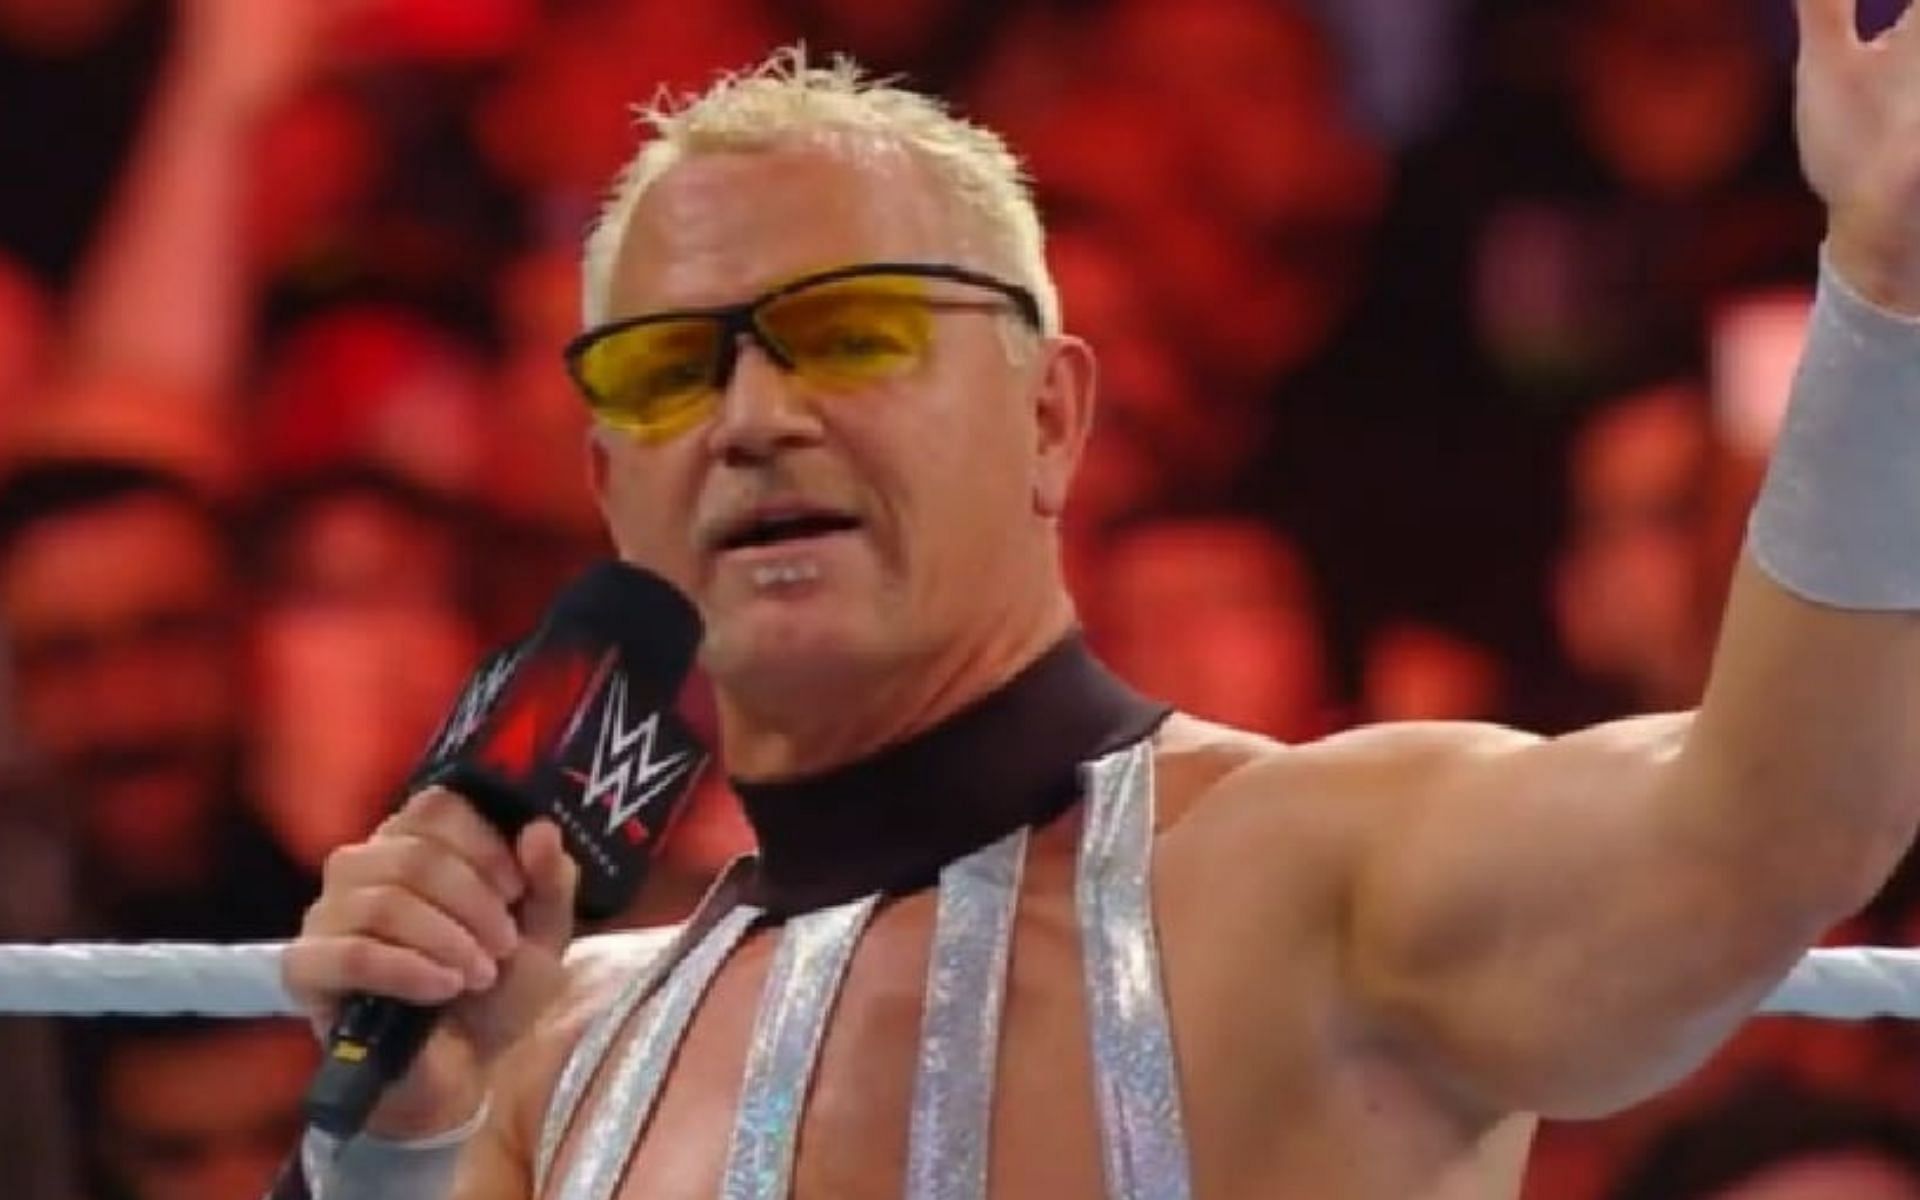 The WWE Hall of Famer during an appearance on RAW in 2019